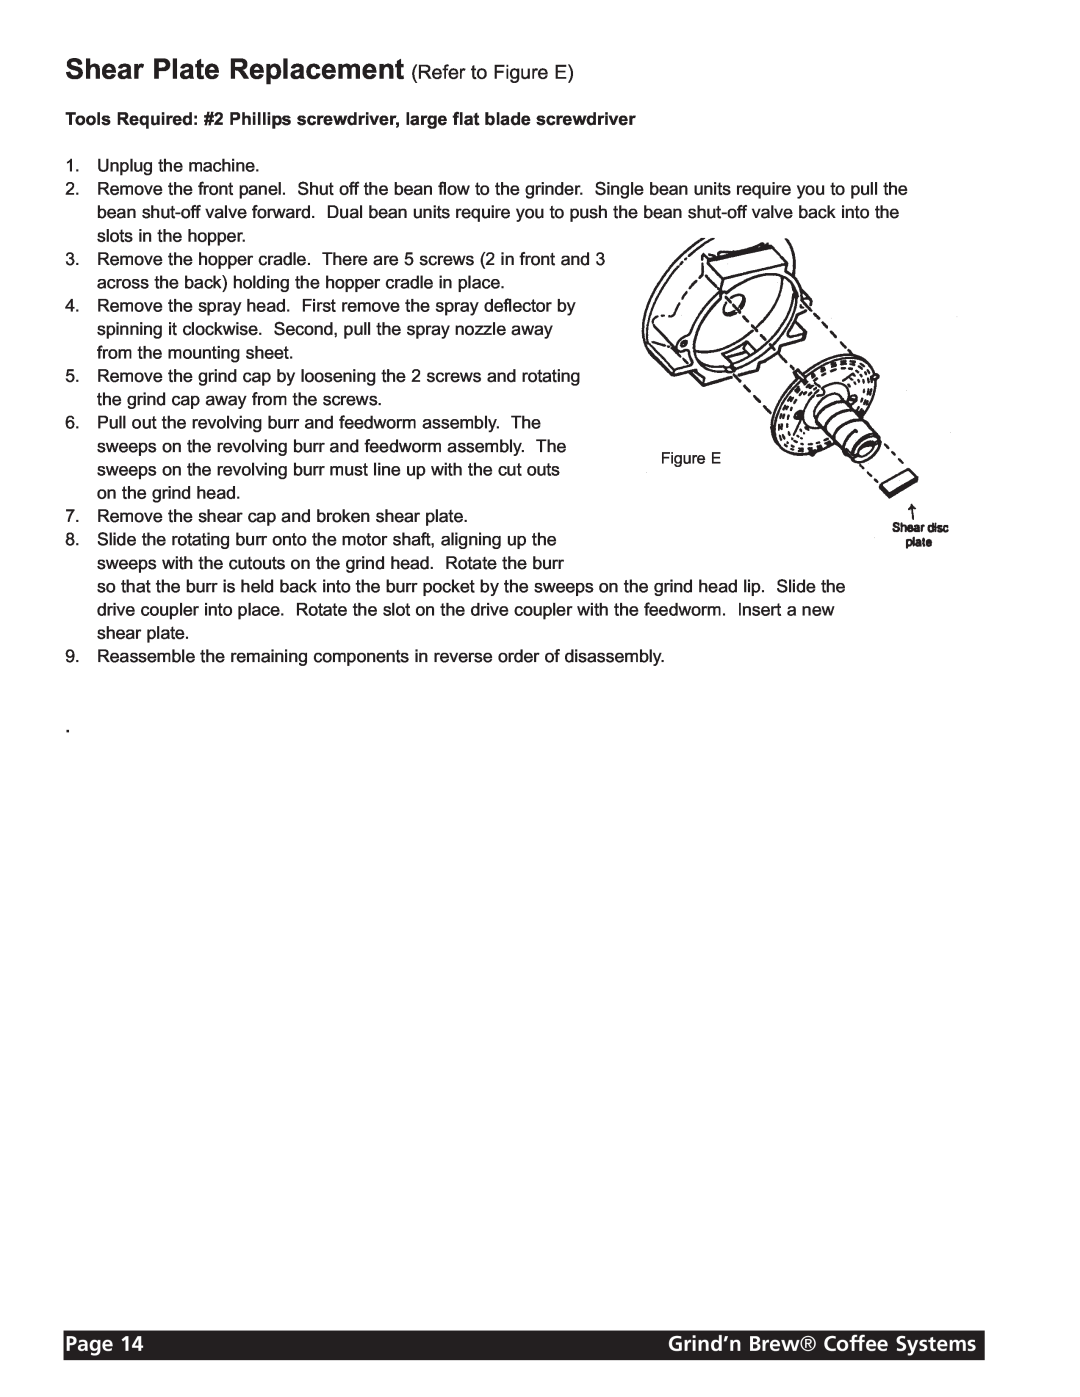 Grindmaster 11 instruction manual Shear Plate Replacement Refer to Figure E, Page, Grind’n Brew Coffee Systems 